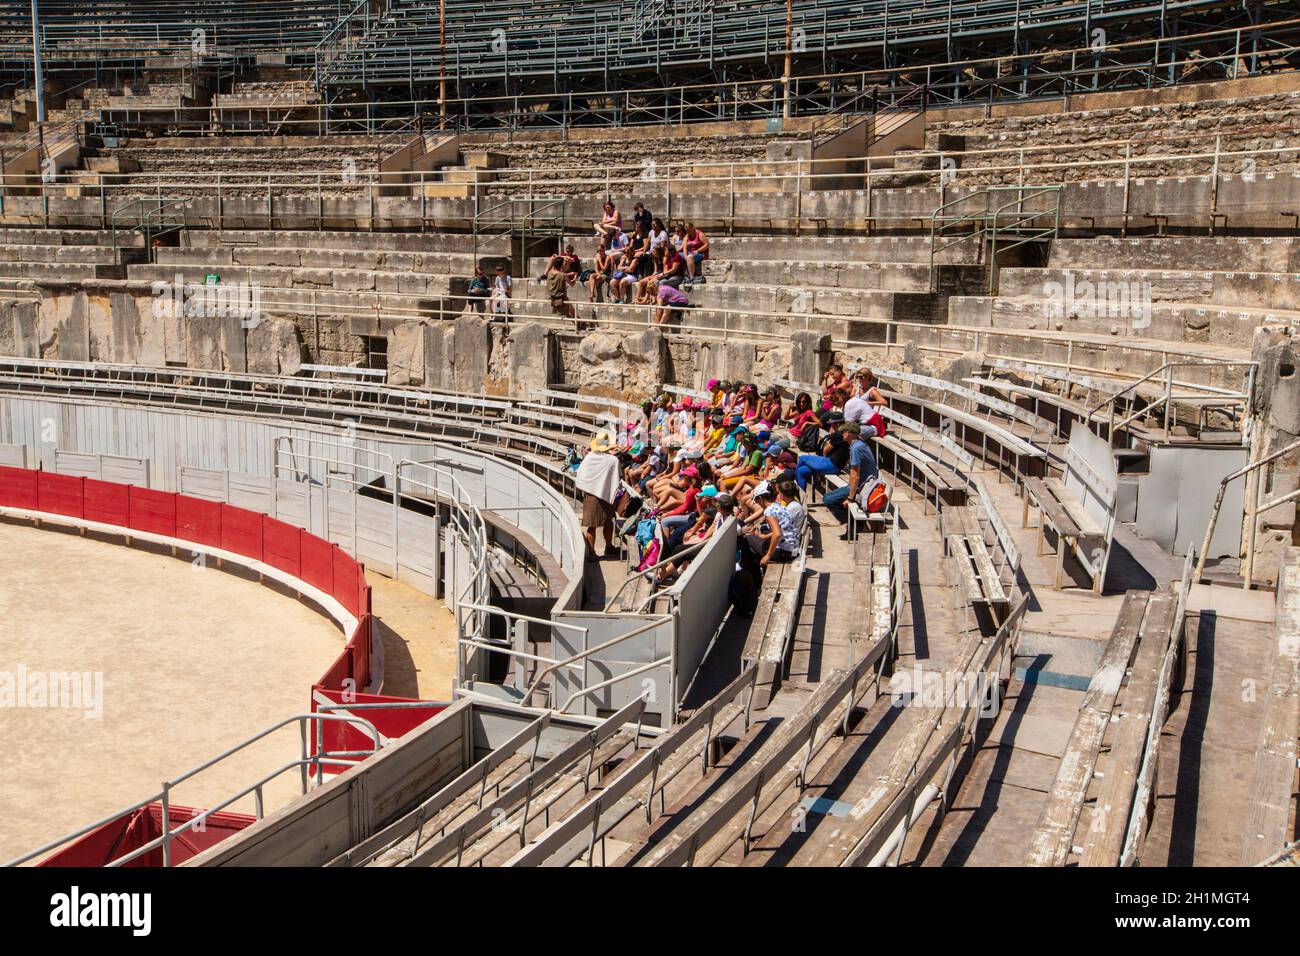 Arles, France - JUNE 19 - 2018: A group of tourists resting on the steps of the ancient amphitheater. Stock Photo